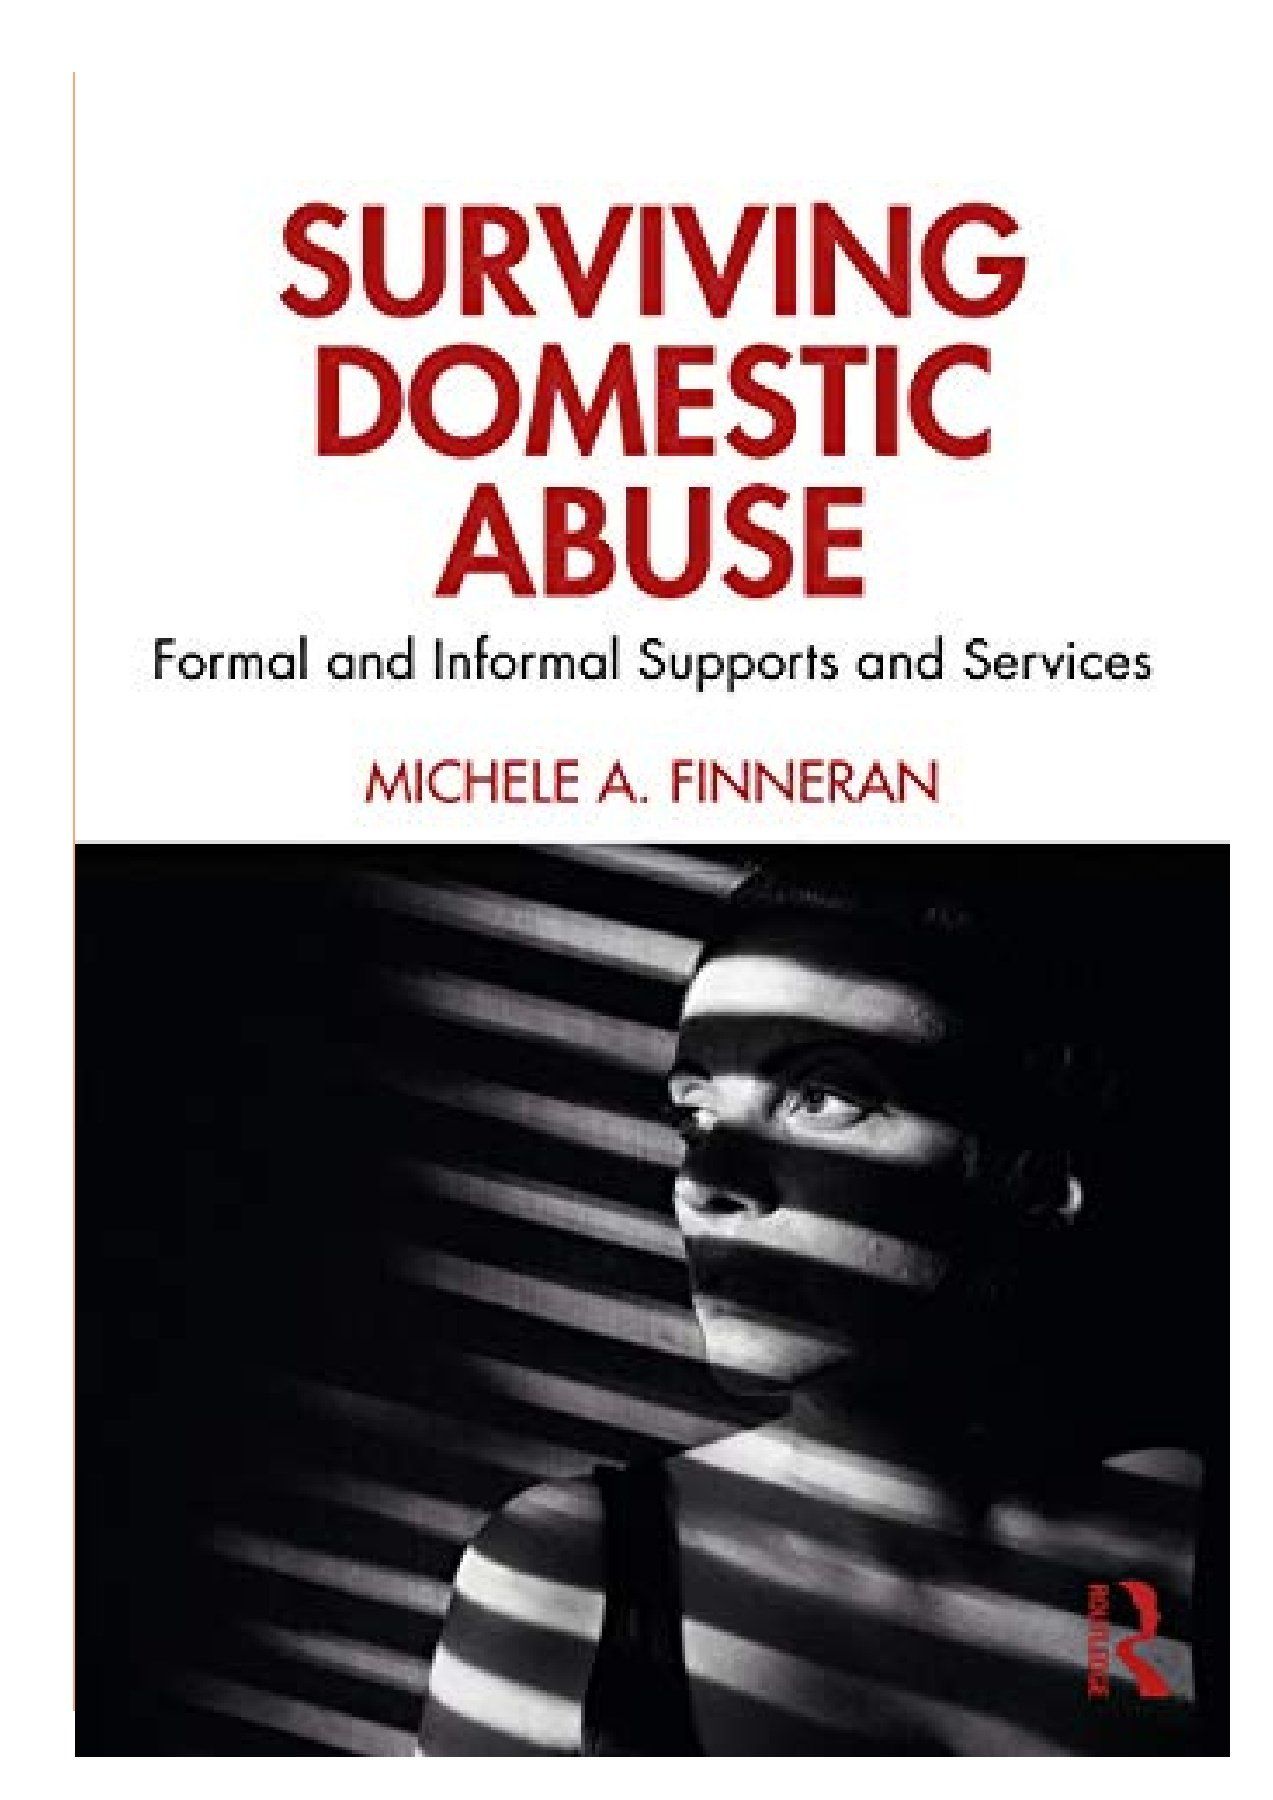 Surviving Domestic Abuse: Formal and Informal Supports and Services by Dr. Michele Finneran